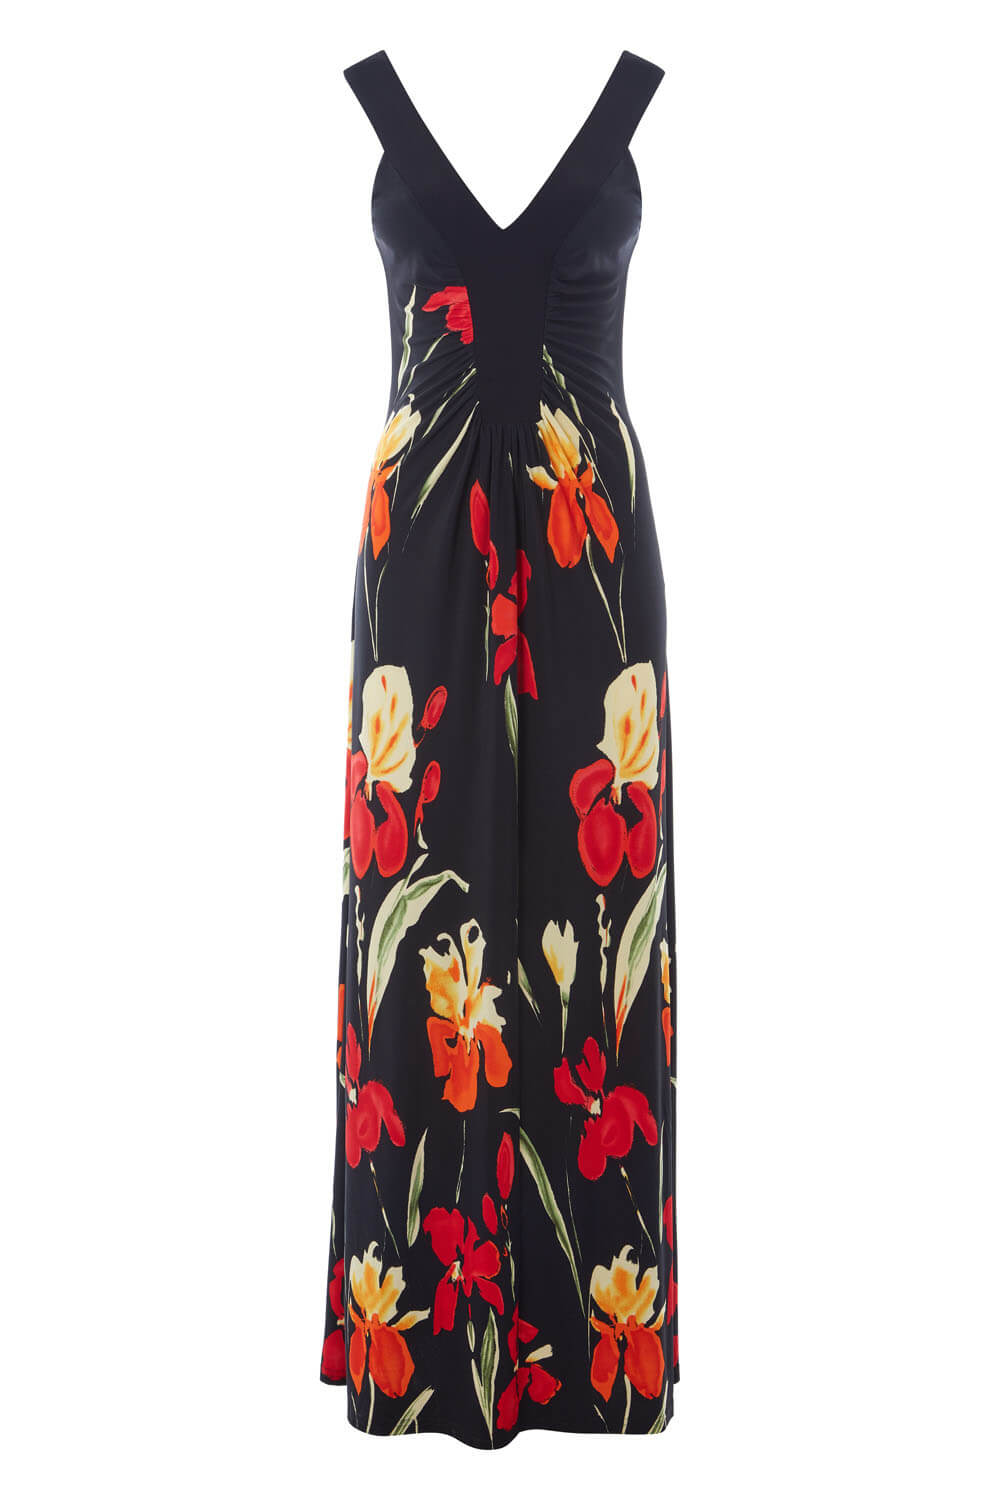 Black Floral Stretch Jersey Maxi Dress, Image 6 of 6